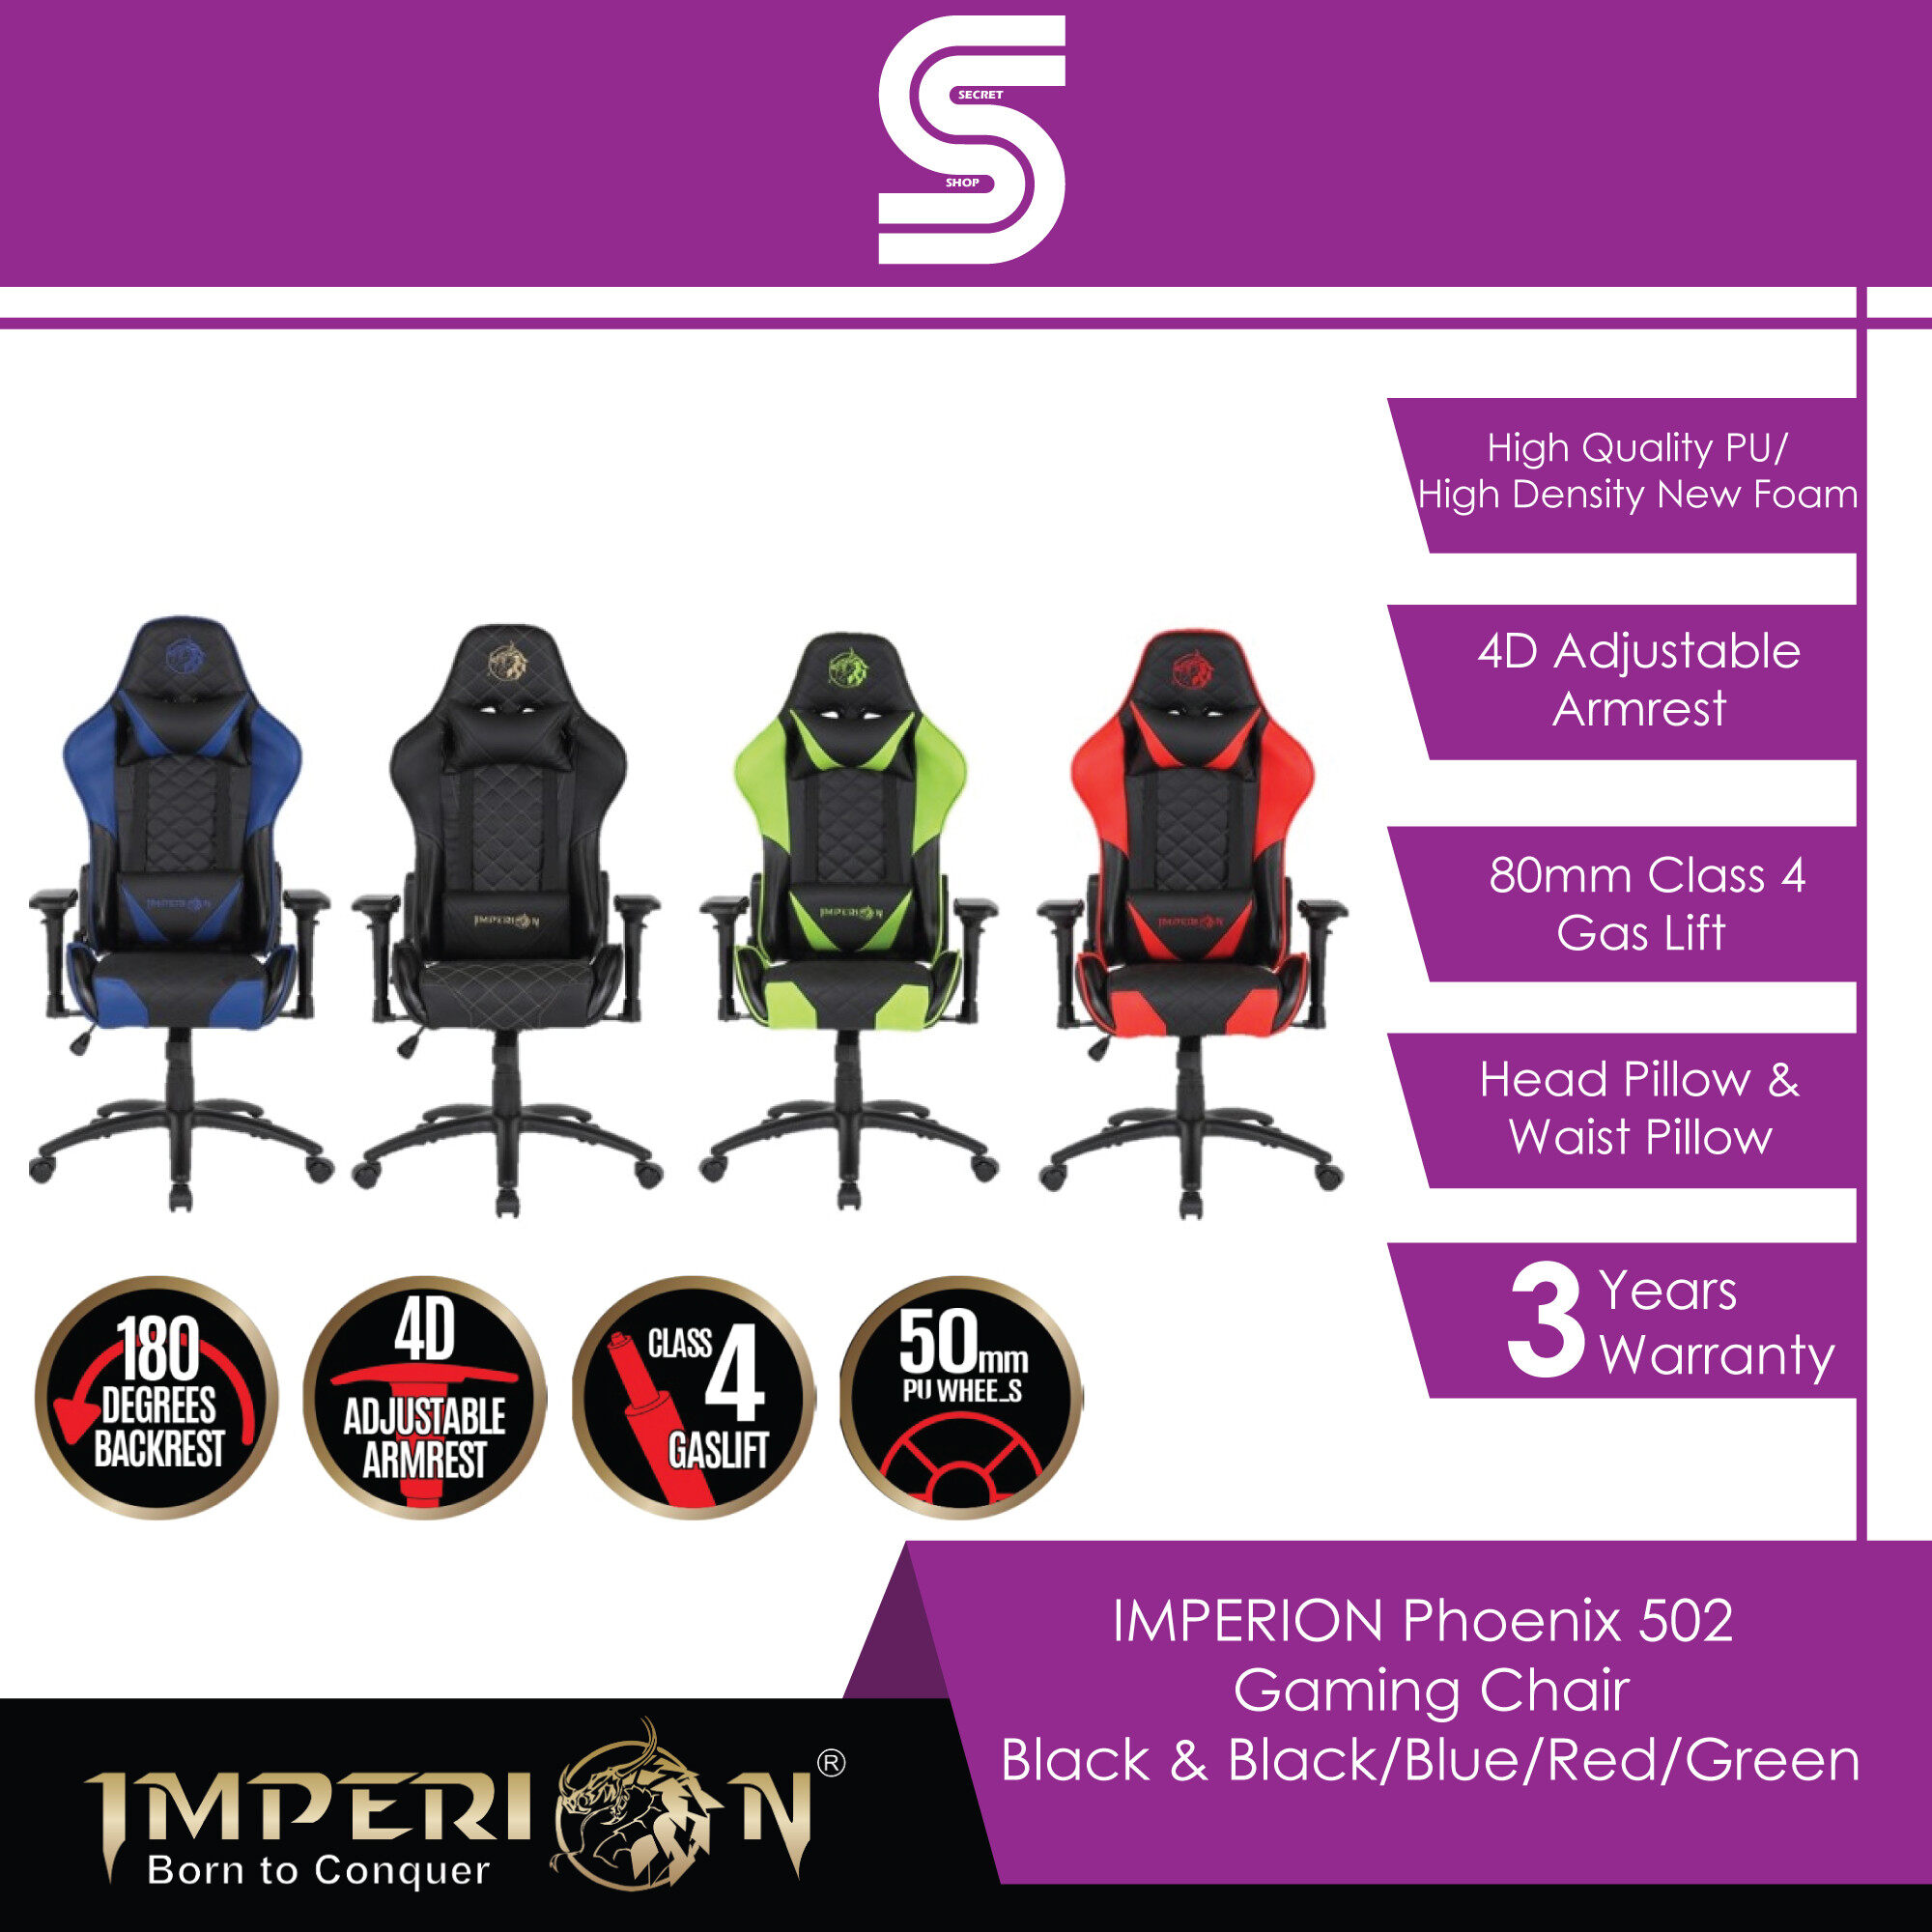 IMPERION Phoenix 502 Gaming Chair - Black & Black/Blue/Green/Red